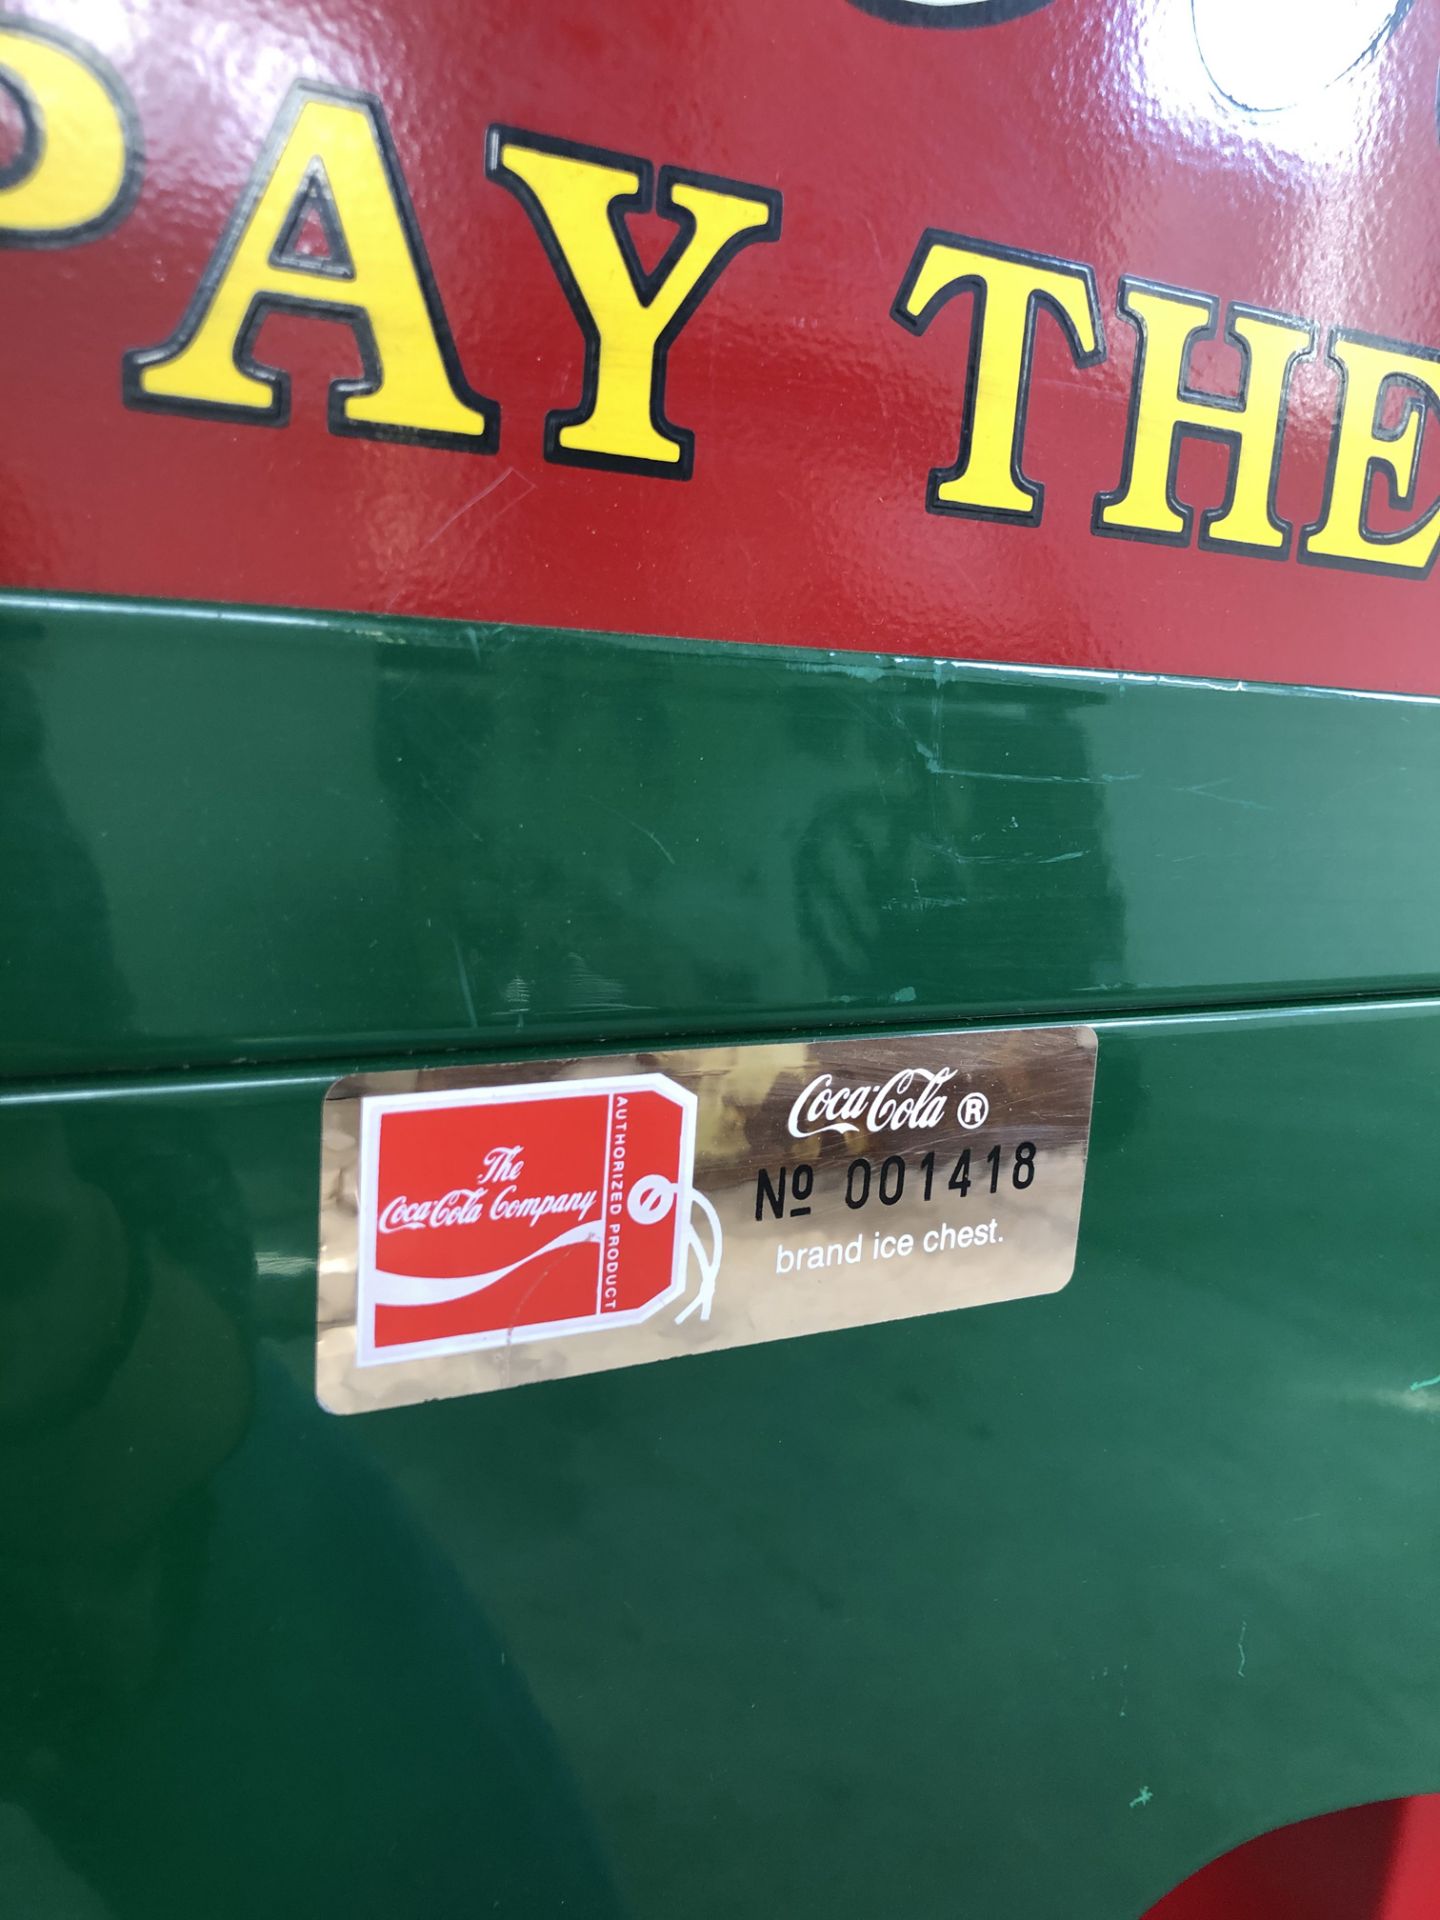 1990's reproduction of a 1929 Glock Coca-Cola Ice Chest - Image 6 of 6